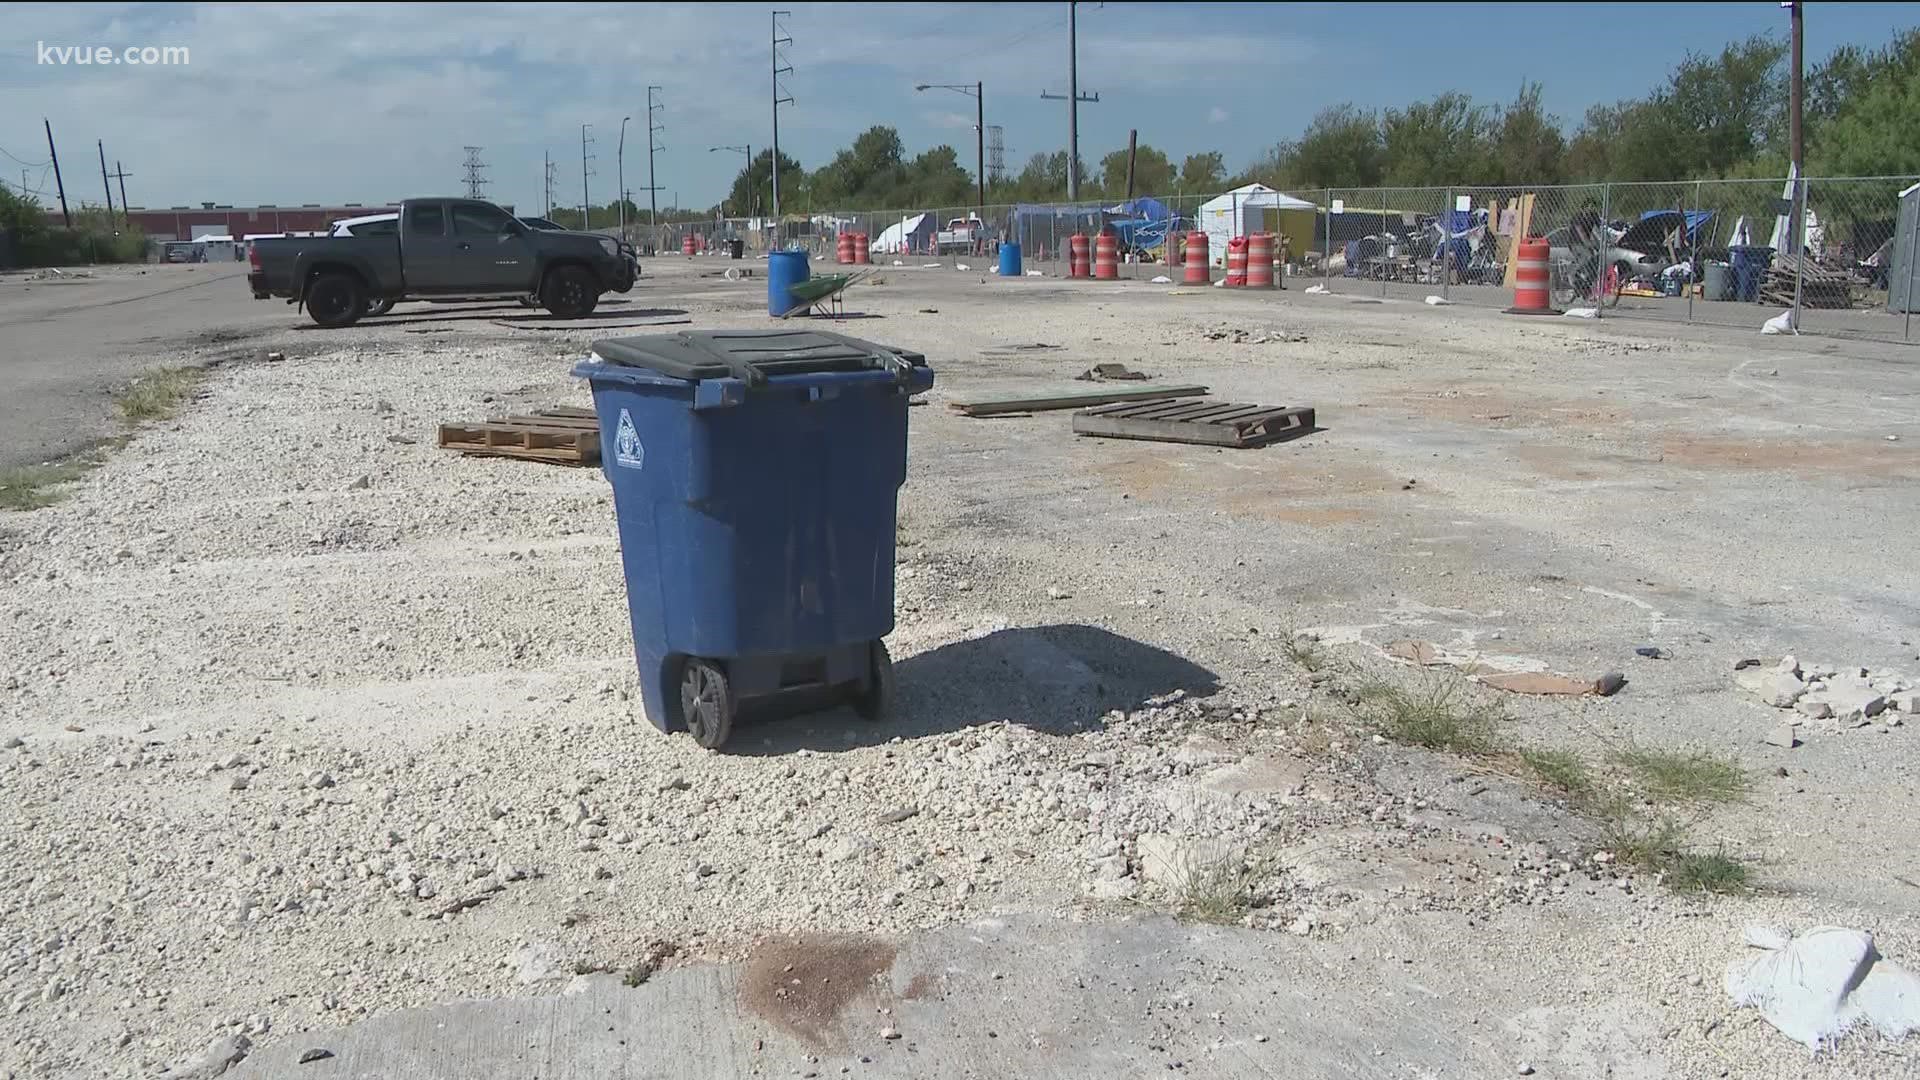 The Other Ones Foundation is developing the new transitional shelter complex at Esperanza Community, the State-sanctioned homeless campsite in southeast Austin.